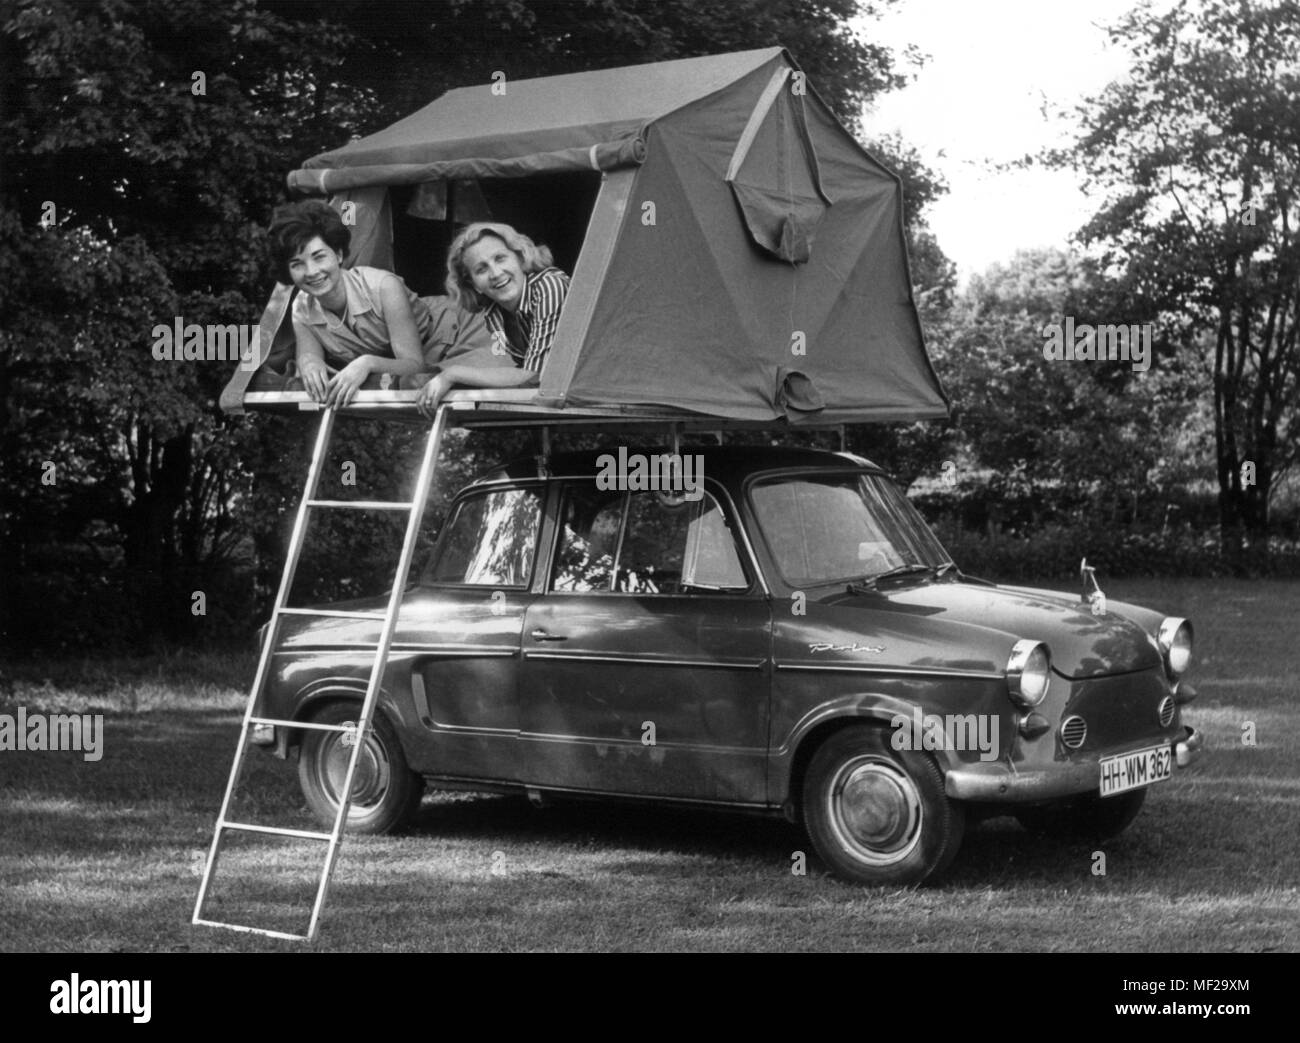 Two young women lie in a camping car roof tent mounted on a NSU prince. The camping tent on the car roof was presented on 16.06.1966 in Hamburg as a trade fair novelty from Milan. It is two meters long and 1.30 meters wide and is intended as a sleeping place for two people and one child. Fitting for any car, it attaches as a low package on the car roof, like a simple luggage rack. Photo: Georg Spring     (c) dpa - report     | usage worldwide Stock Photo